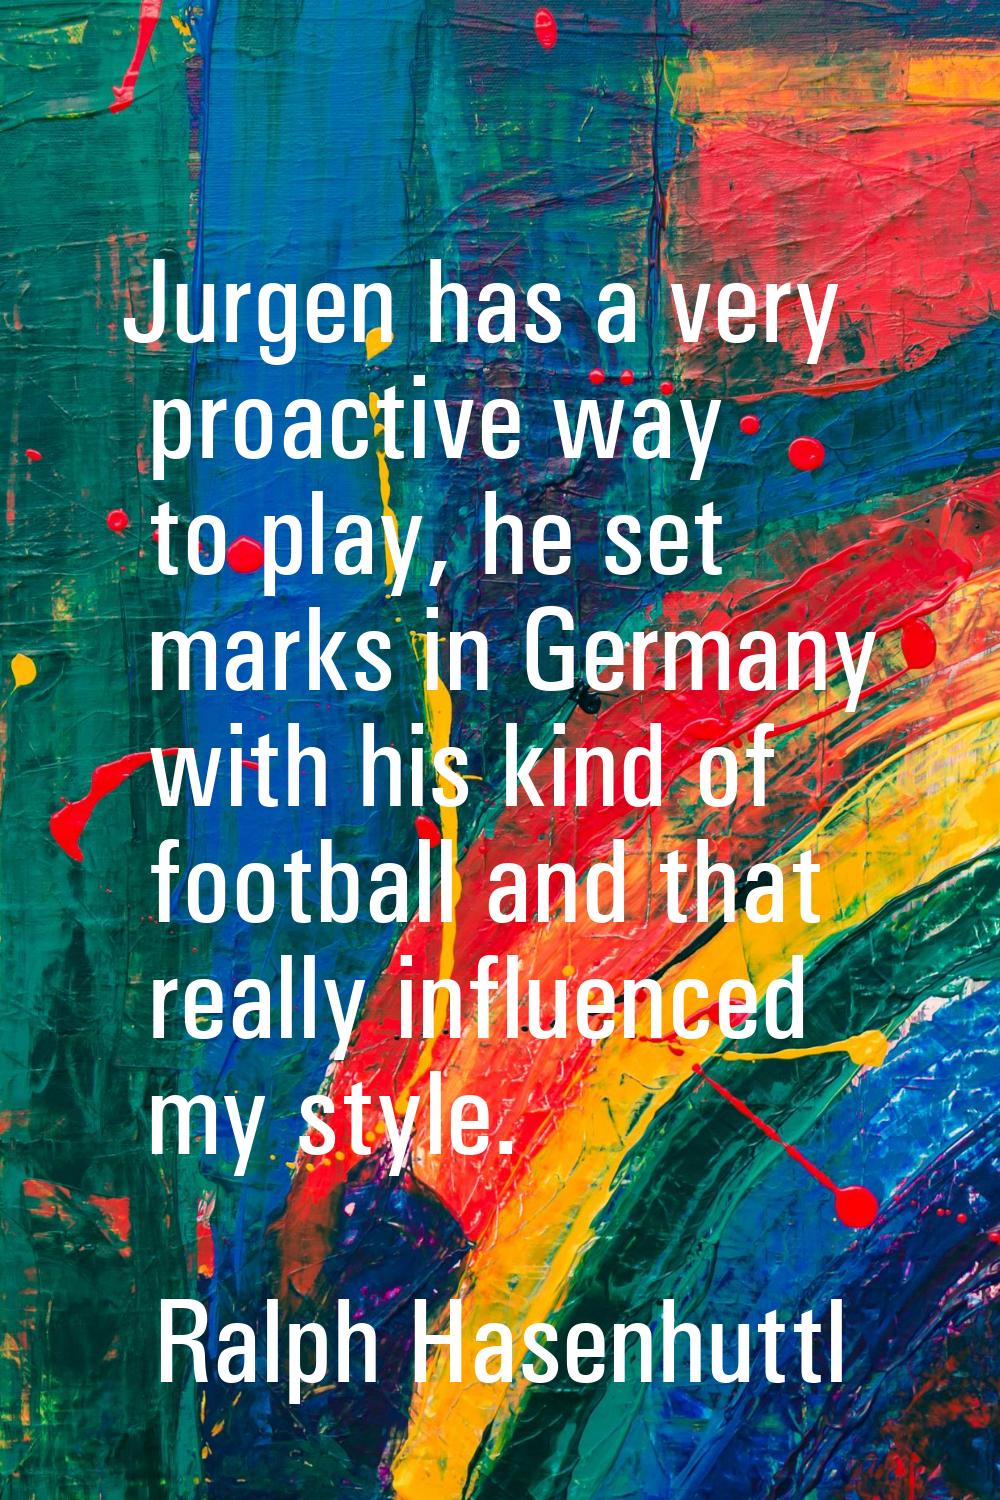 Jurgen has a very proactive way to play, he set marks in Germany with his kind of football and that